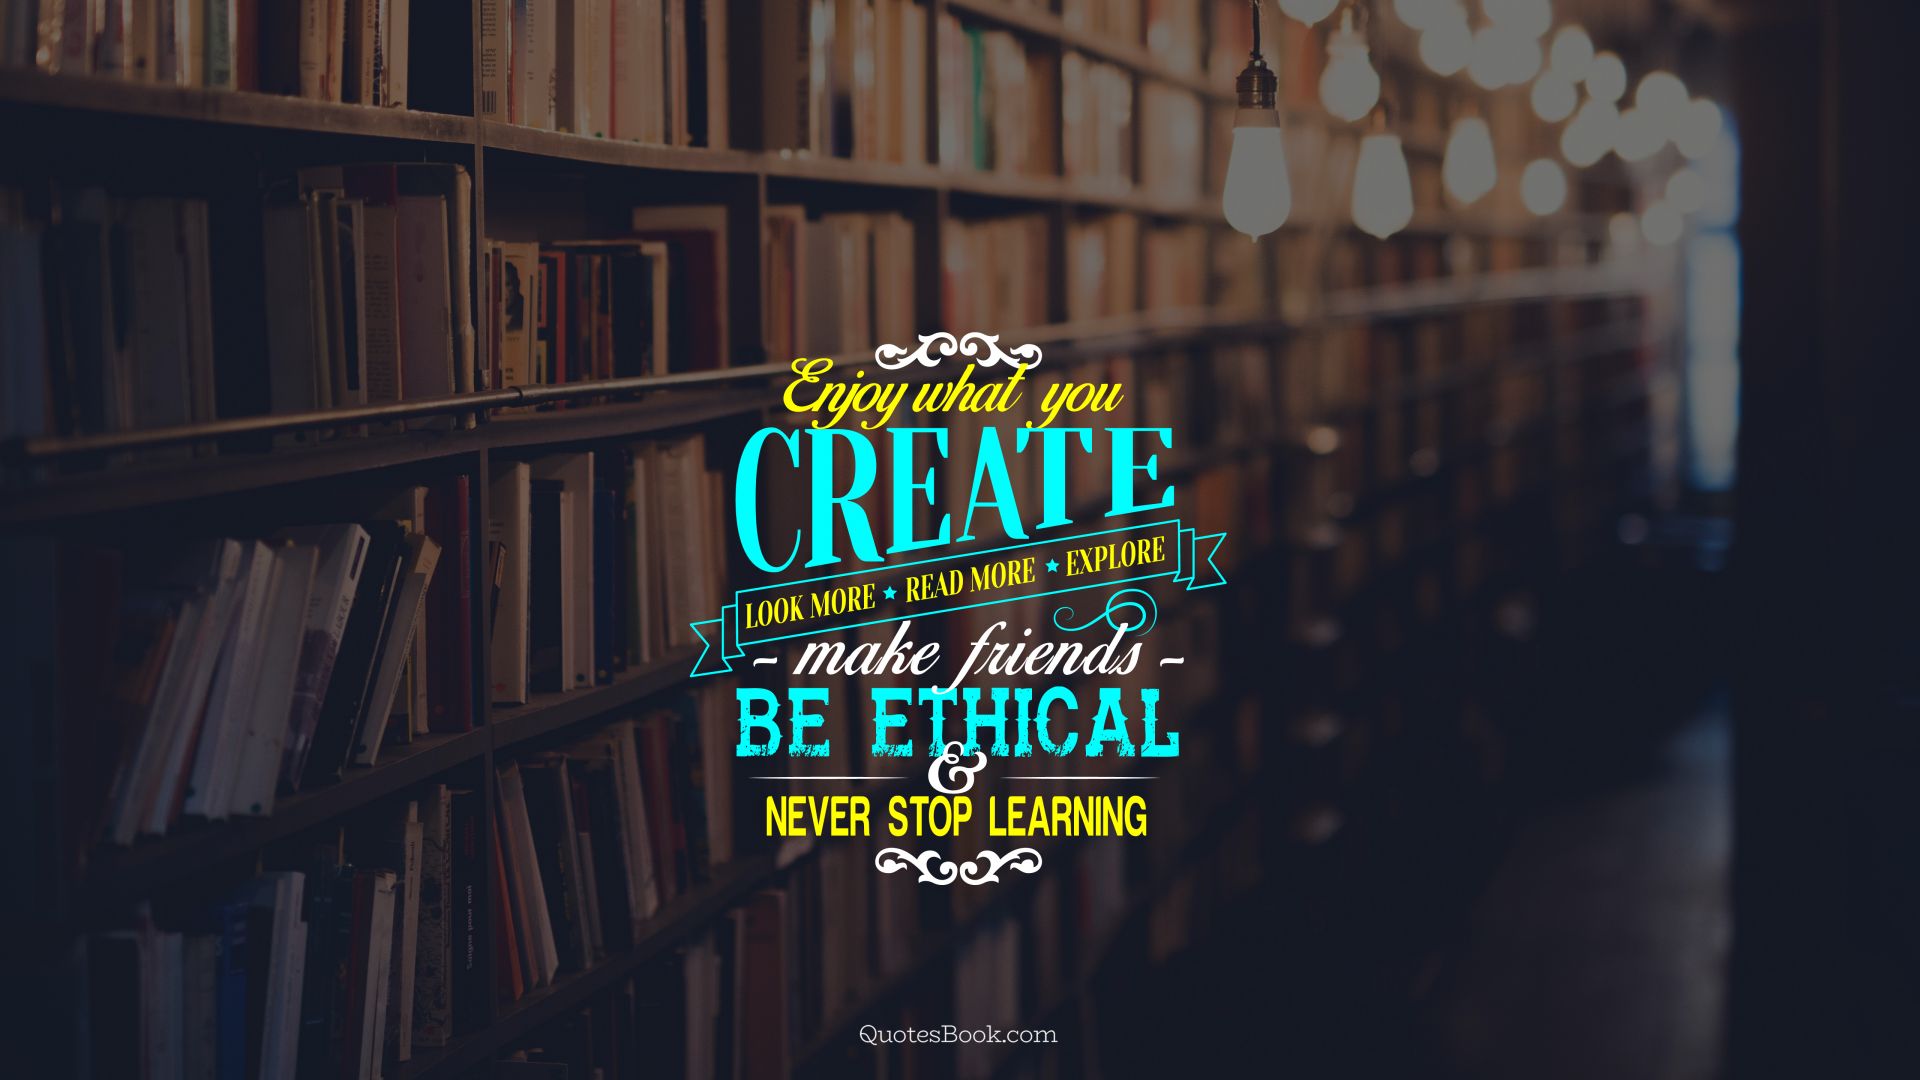 Enjoy what you create. Look more. Read more. Explore. Make friends. Be ethical and never stop learning